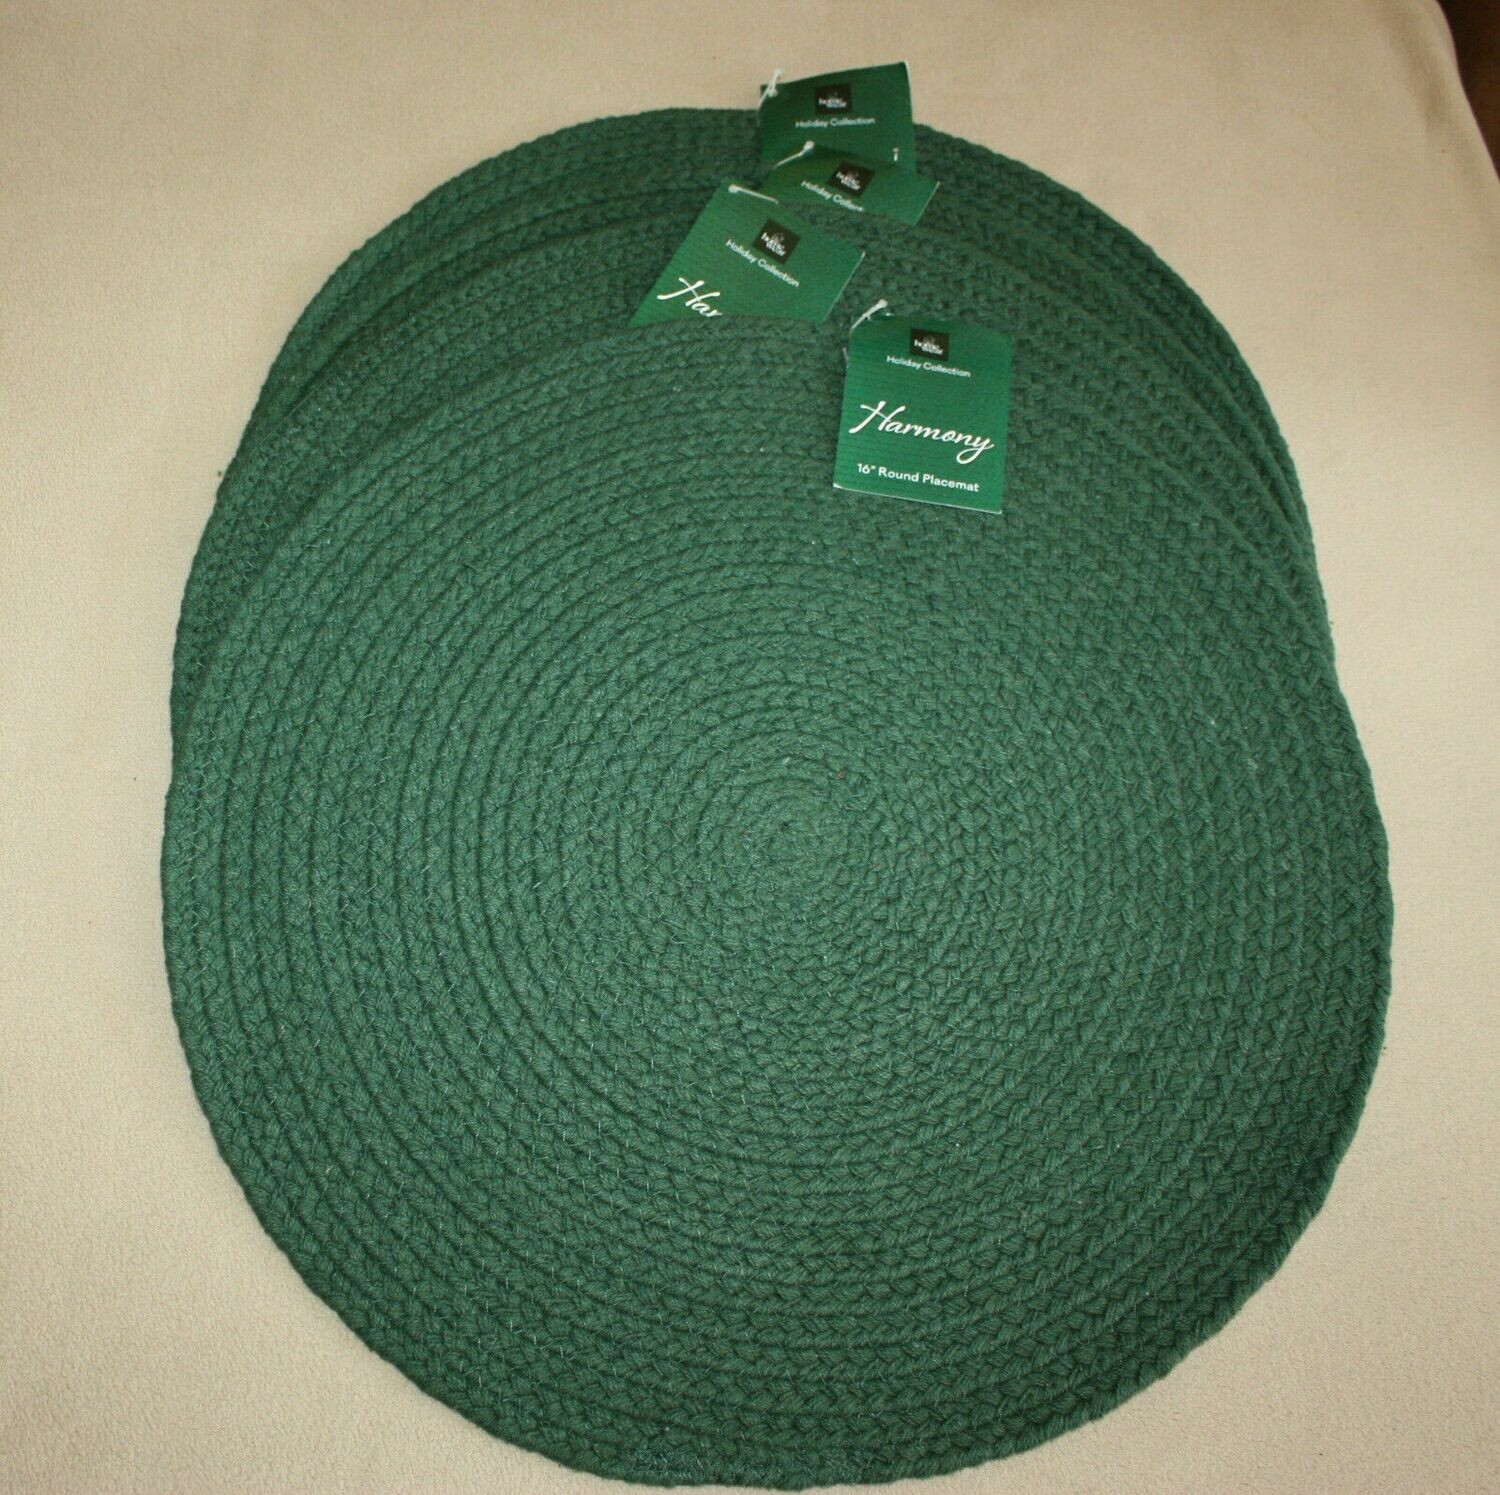 Homewear Harmony 16" Round Green Placemat